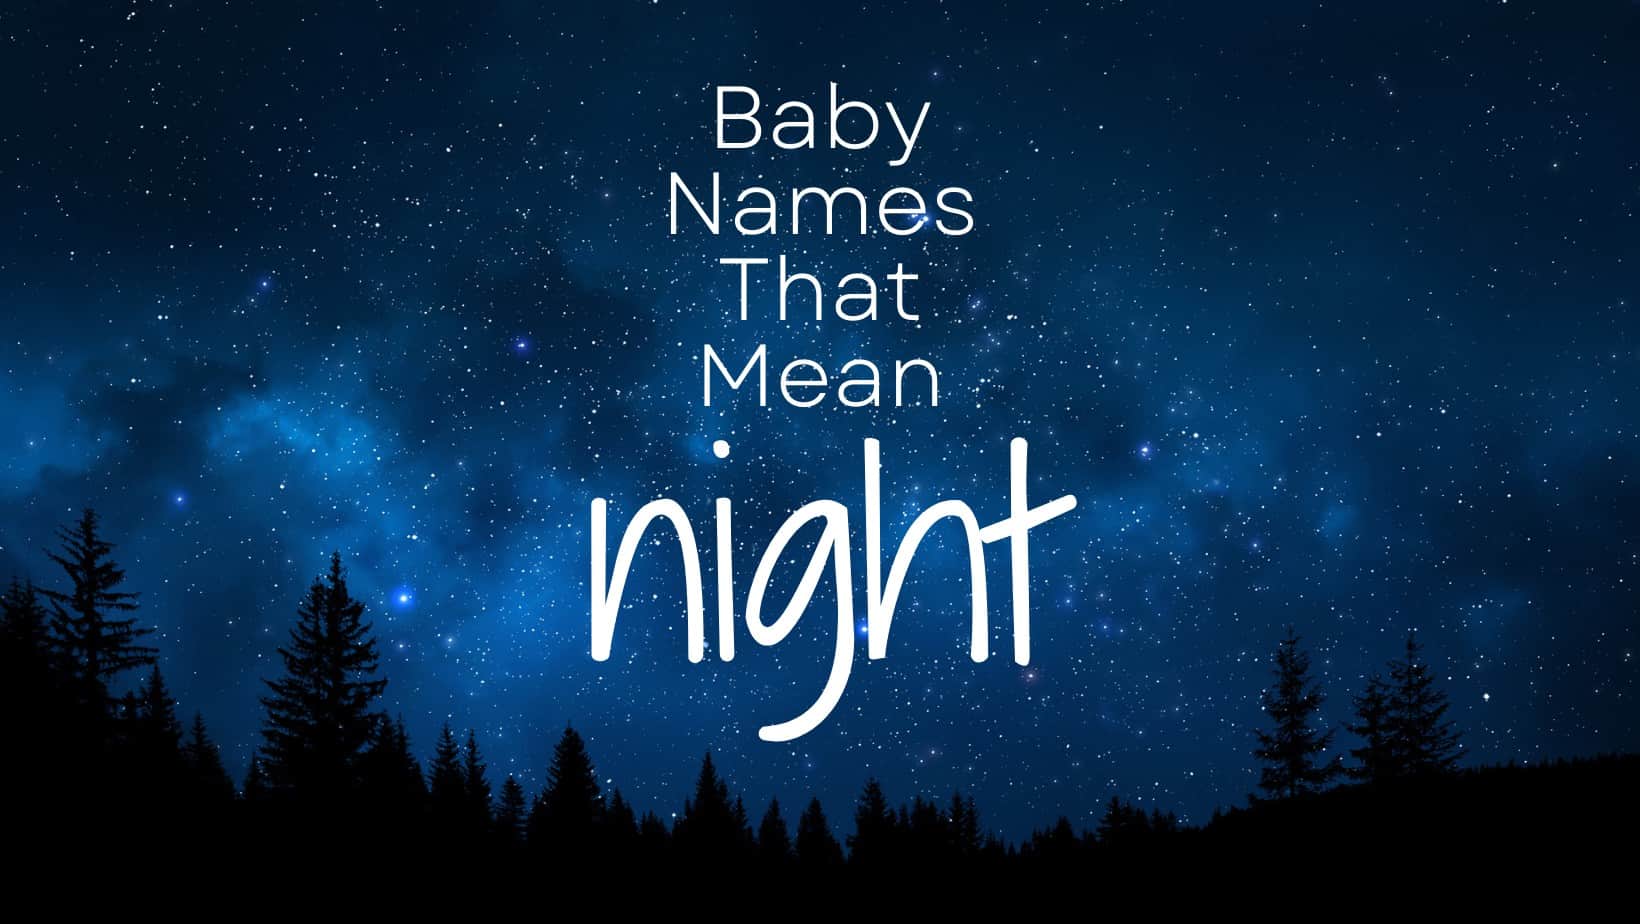 Baby Names That Mean Night